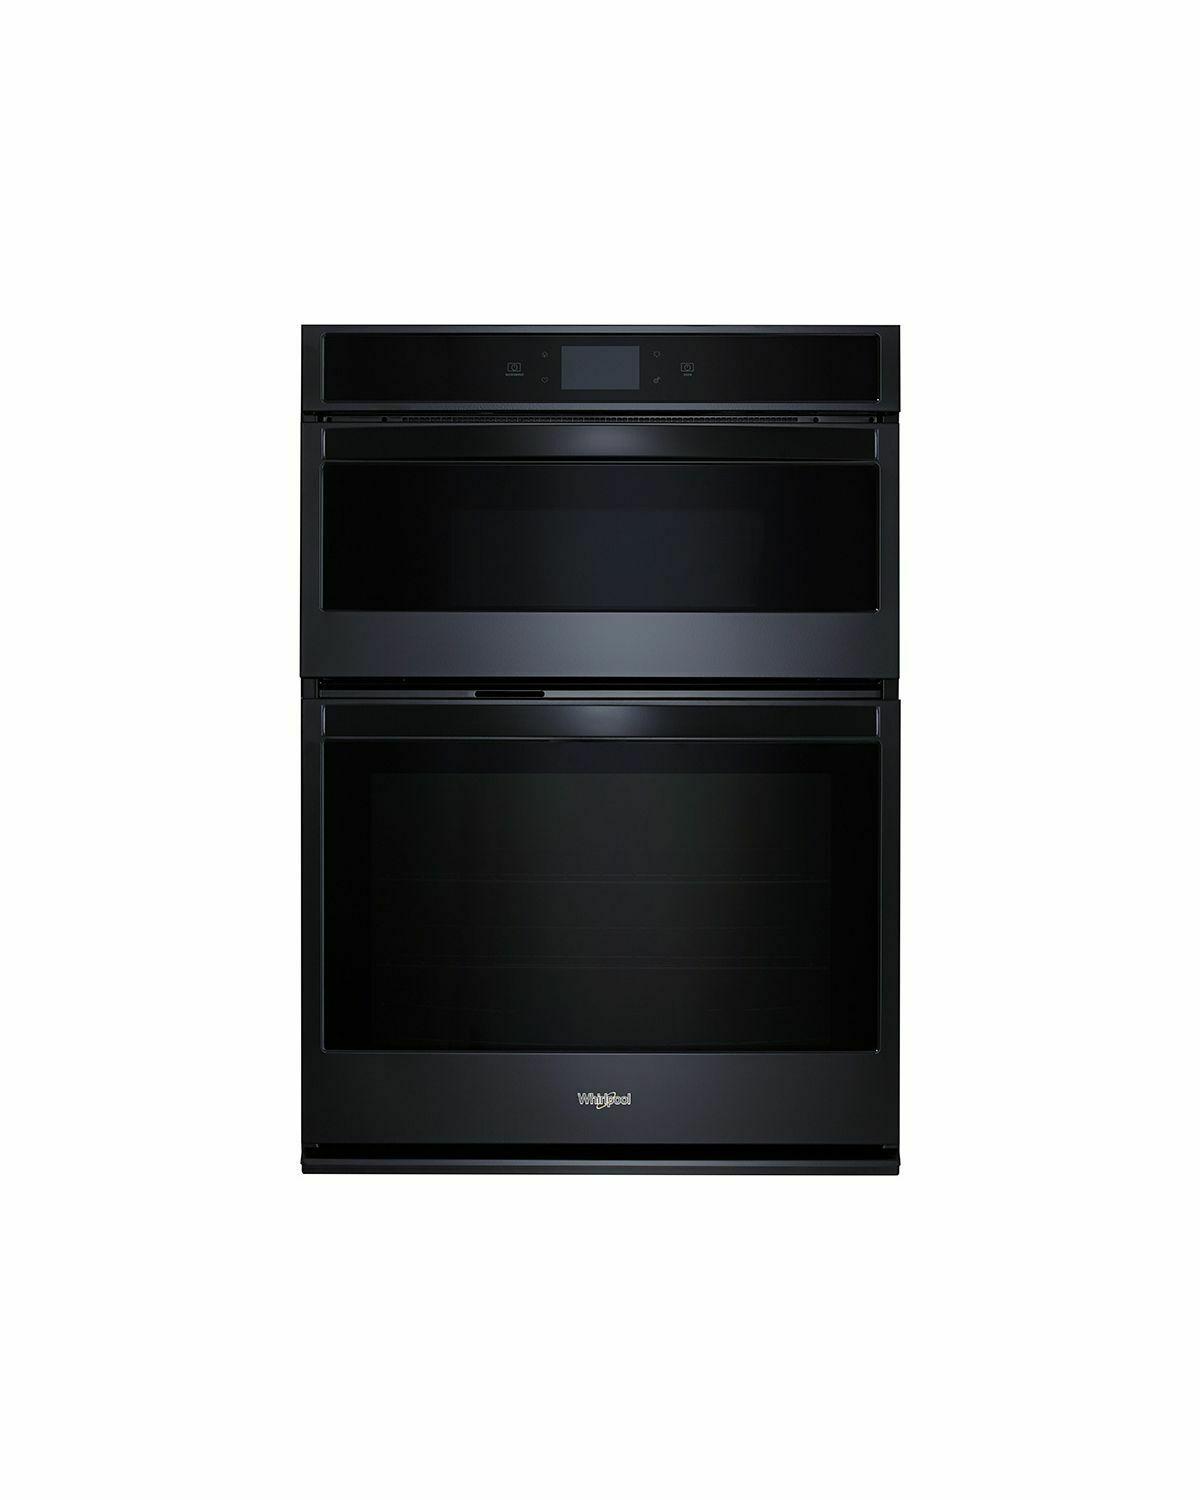 Whirlpool 6.4 cu. ft. Smart Combination Wall Oven with Touchscreen - Black